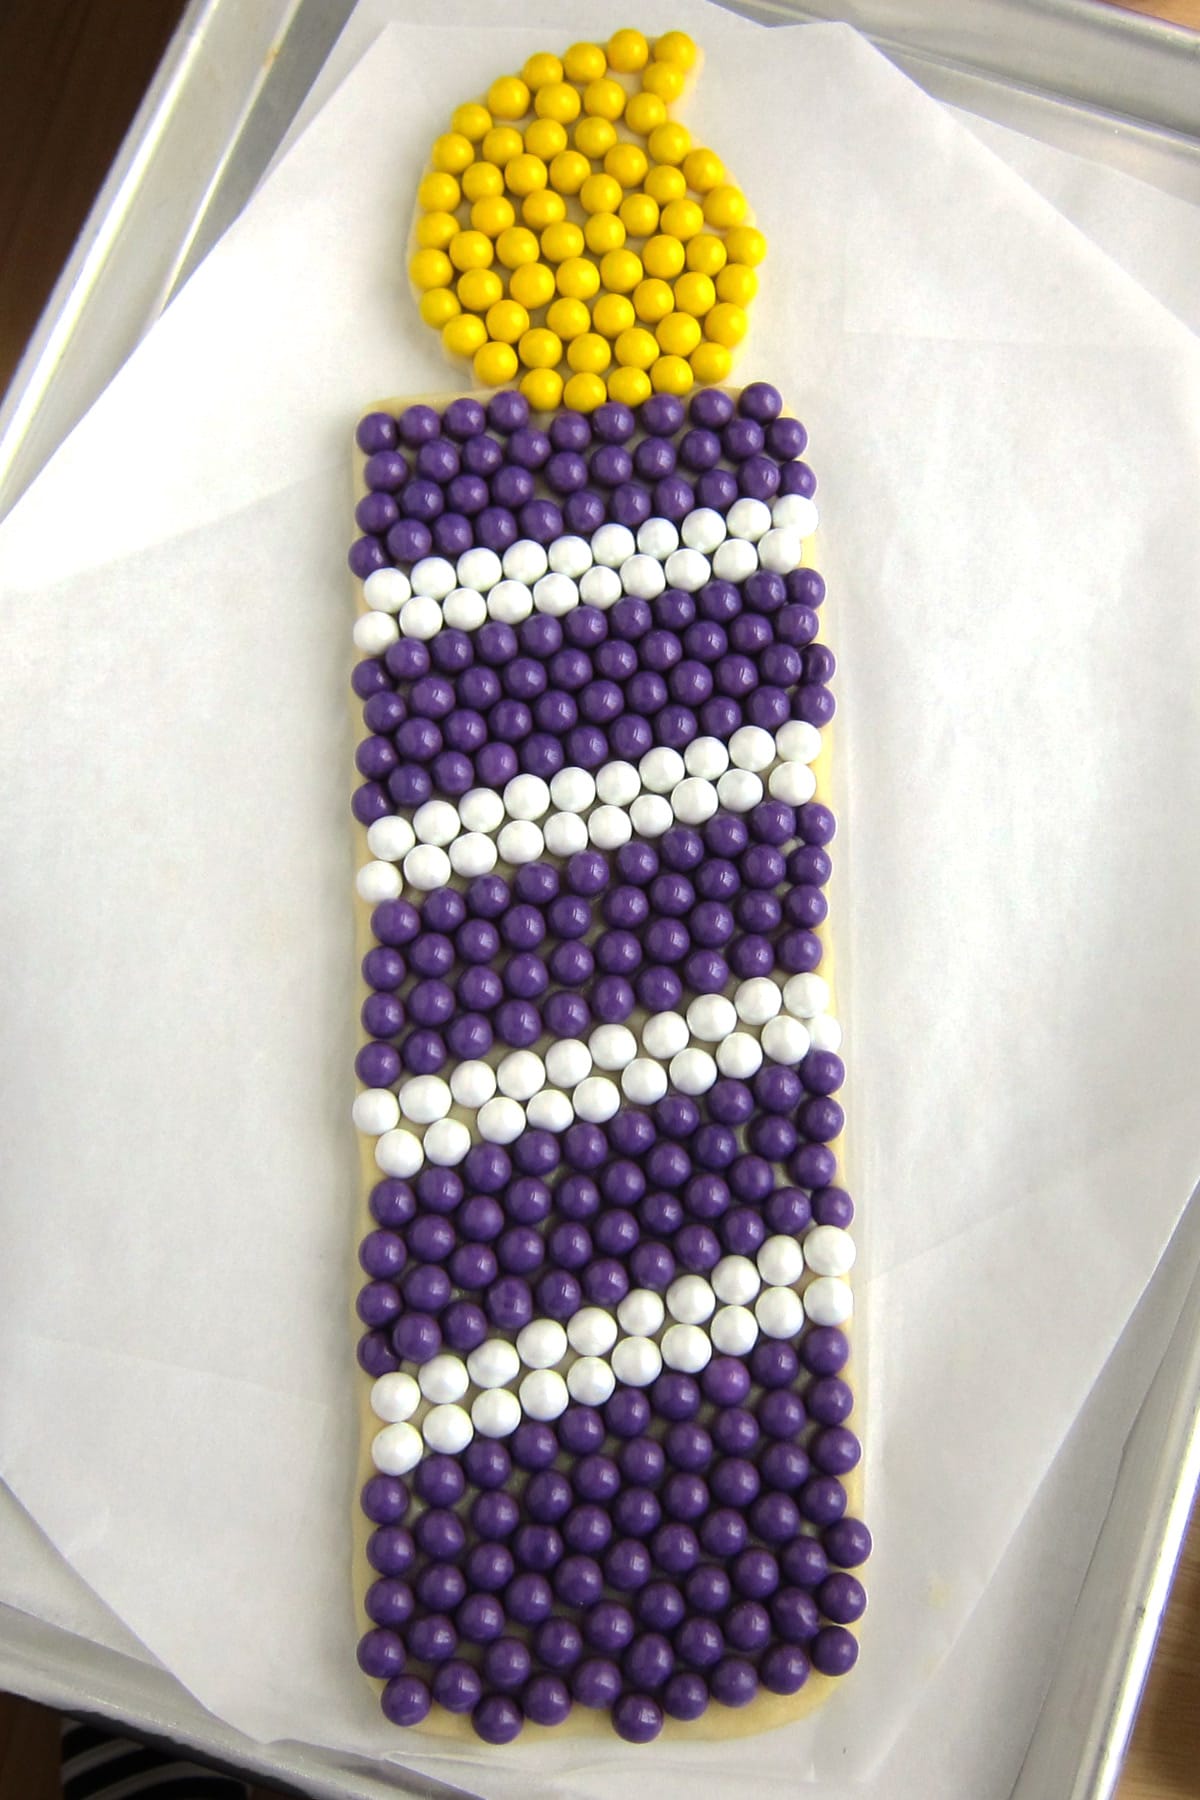 birthday candle cookie decorated with stripes of purple and white Sixlets candies and yellow candies on the flame.